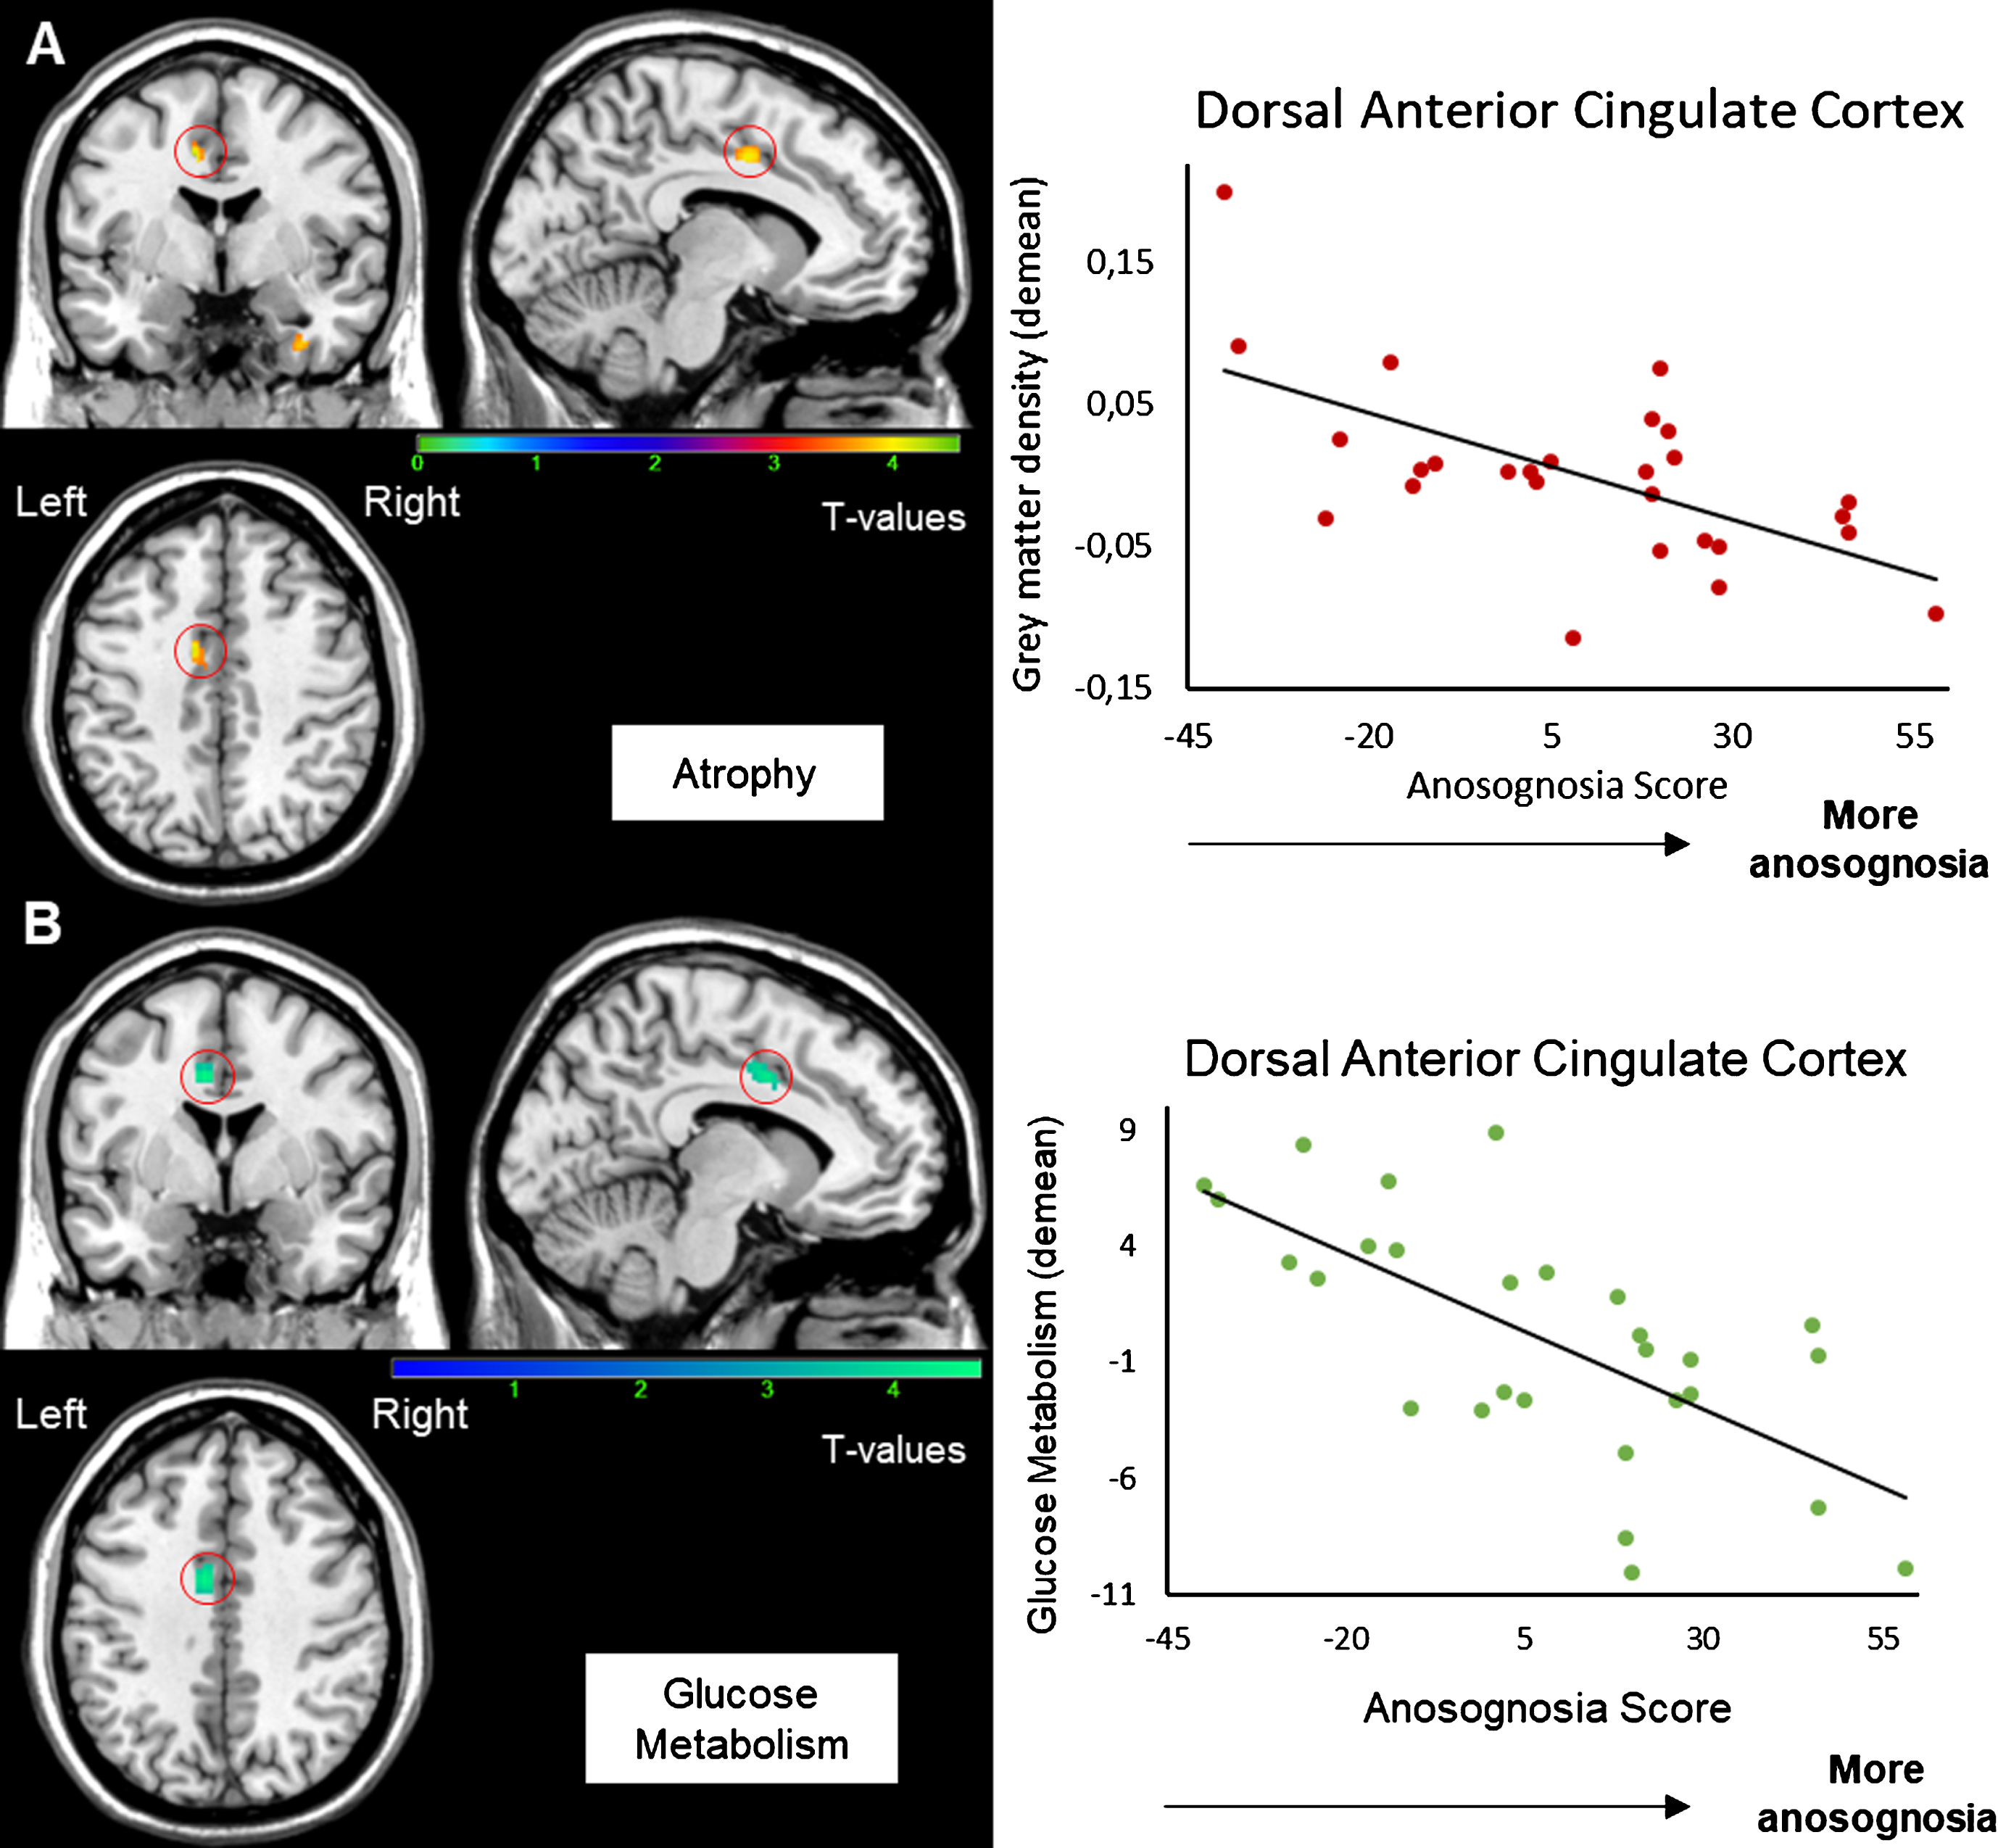 Correlation between the anosognosia score and MRI (A) and FDG-PET scans (B). Results were obtained from 27 T1-3D scans (A) and 28 FDG-PET scans (B) in Alzheimer’s disease patients. The statistical threshold is puncorr <0.001 (k > 70 voxels). Correlations are performed on the whole cluster after extraction of data with MARSBAR.